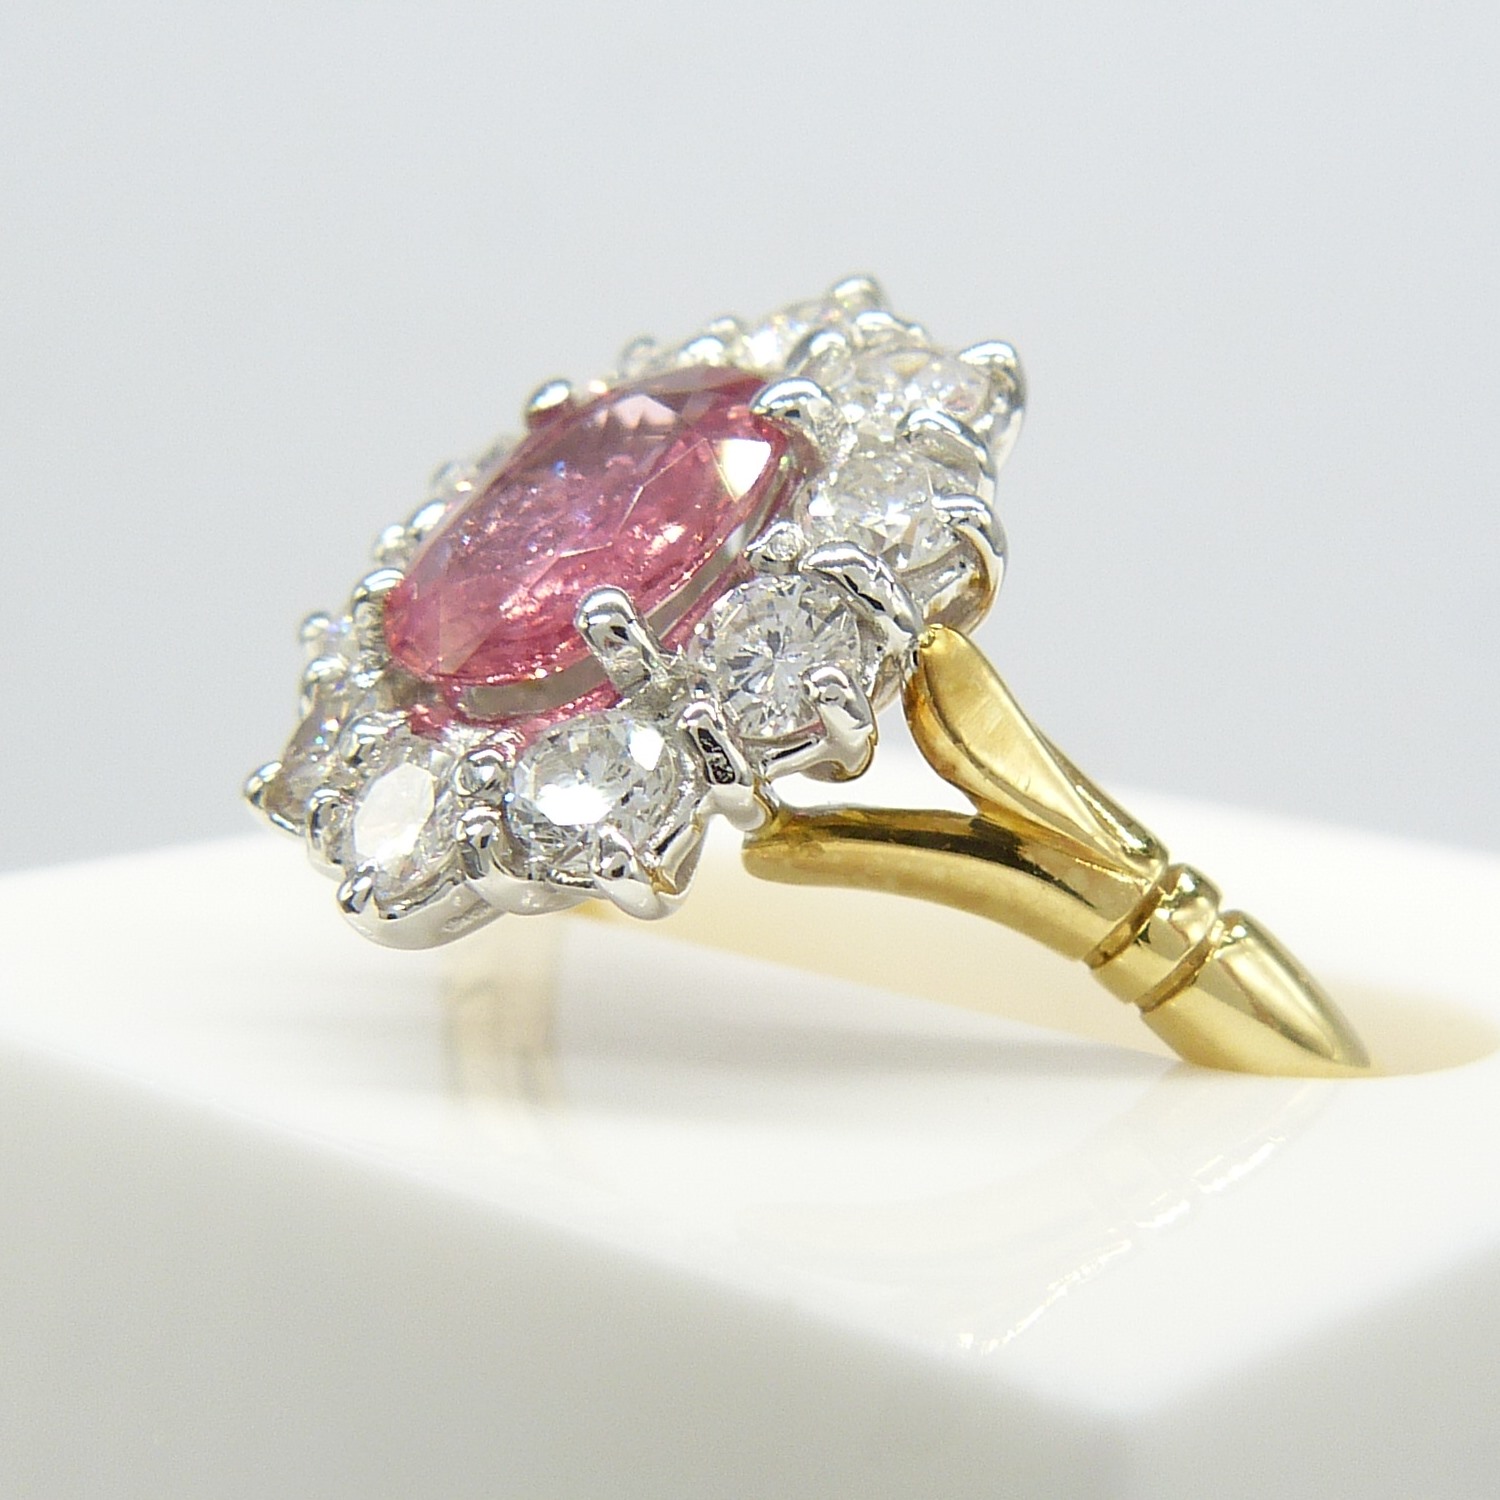 A pinkish-red natural Ruby and Diamond cluster ring in 18ct yellow and white Gold - Image 7 of 10